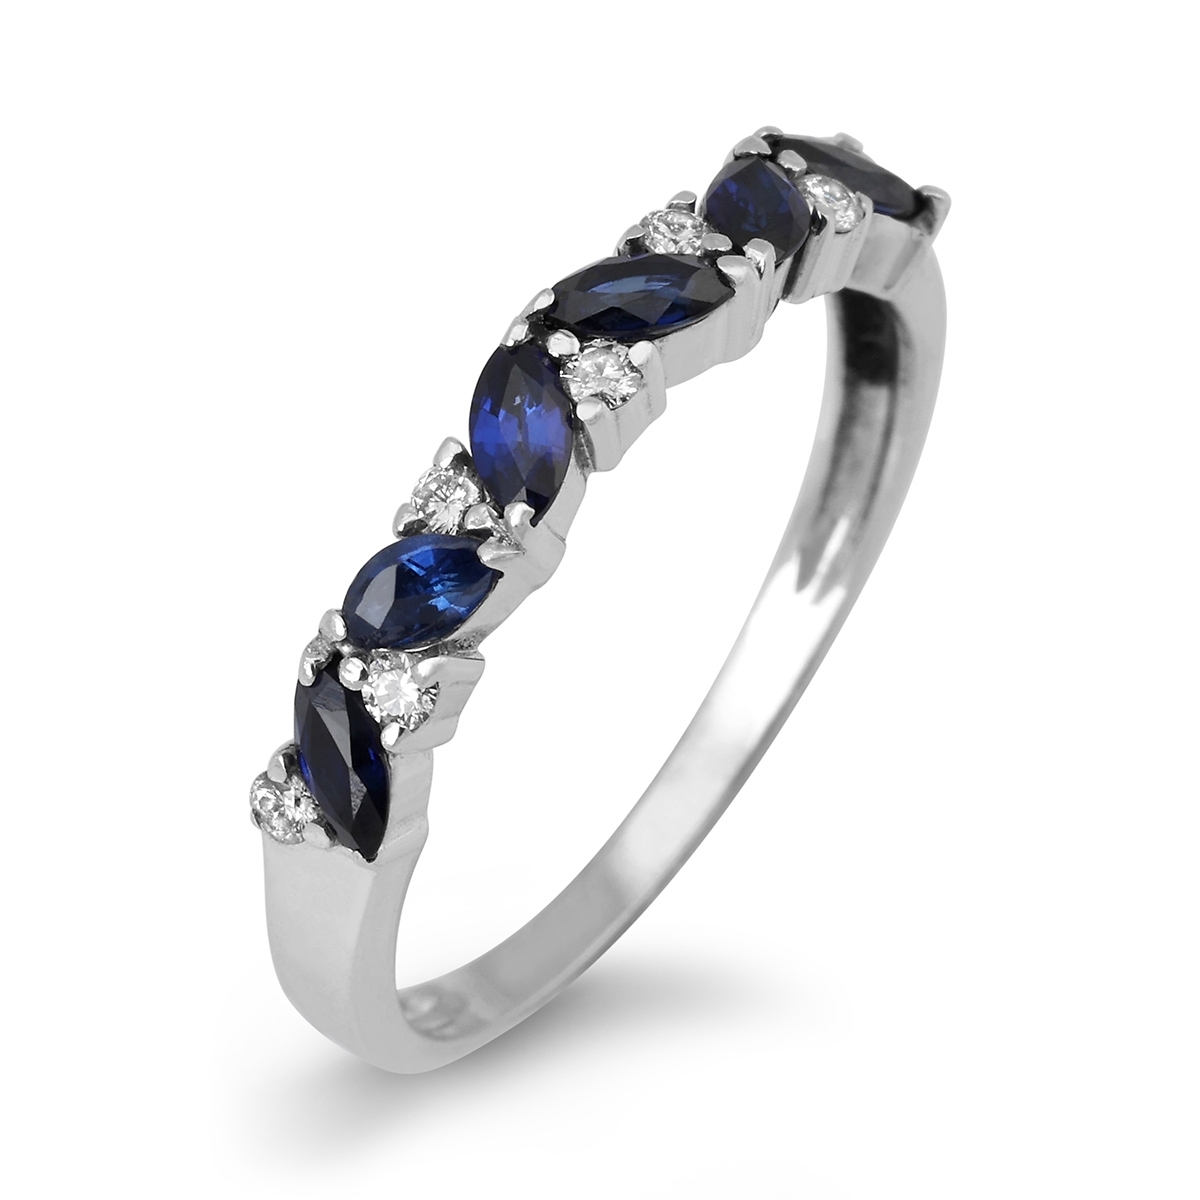 Anbinder Jewelry White Gold Women's Ring with Diamonds and Sapphires - 1